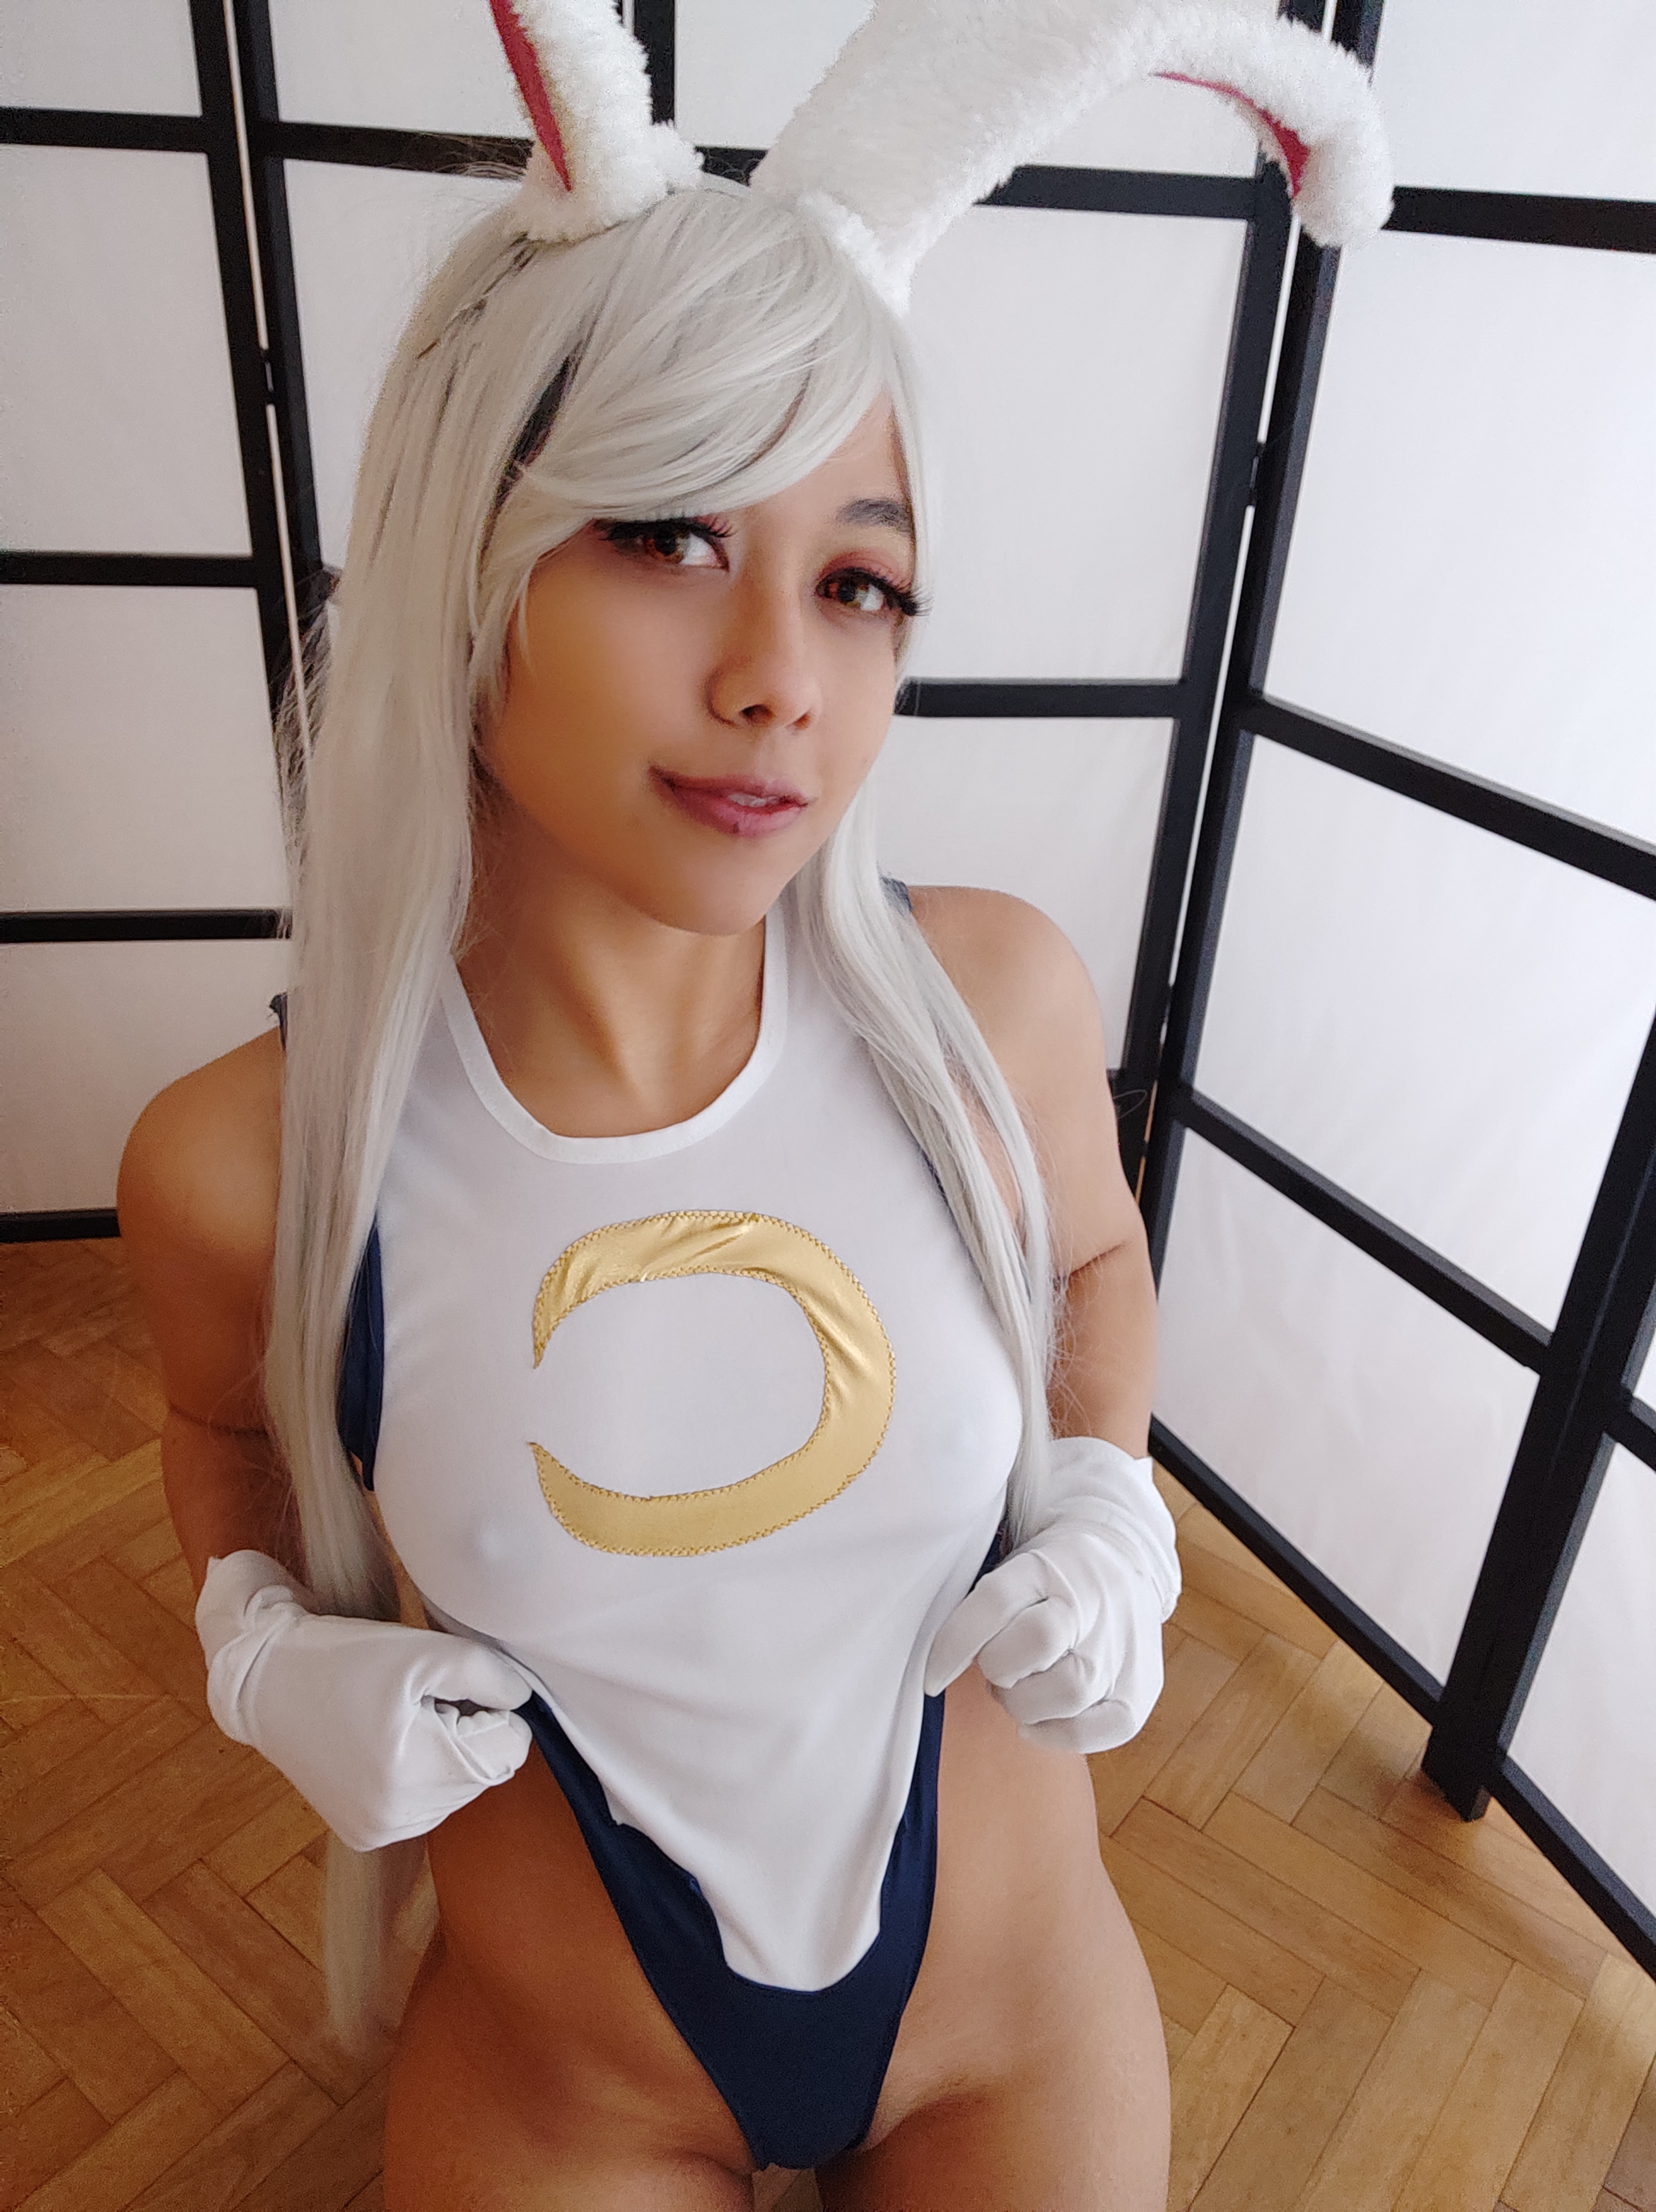 Diracosplay